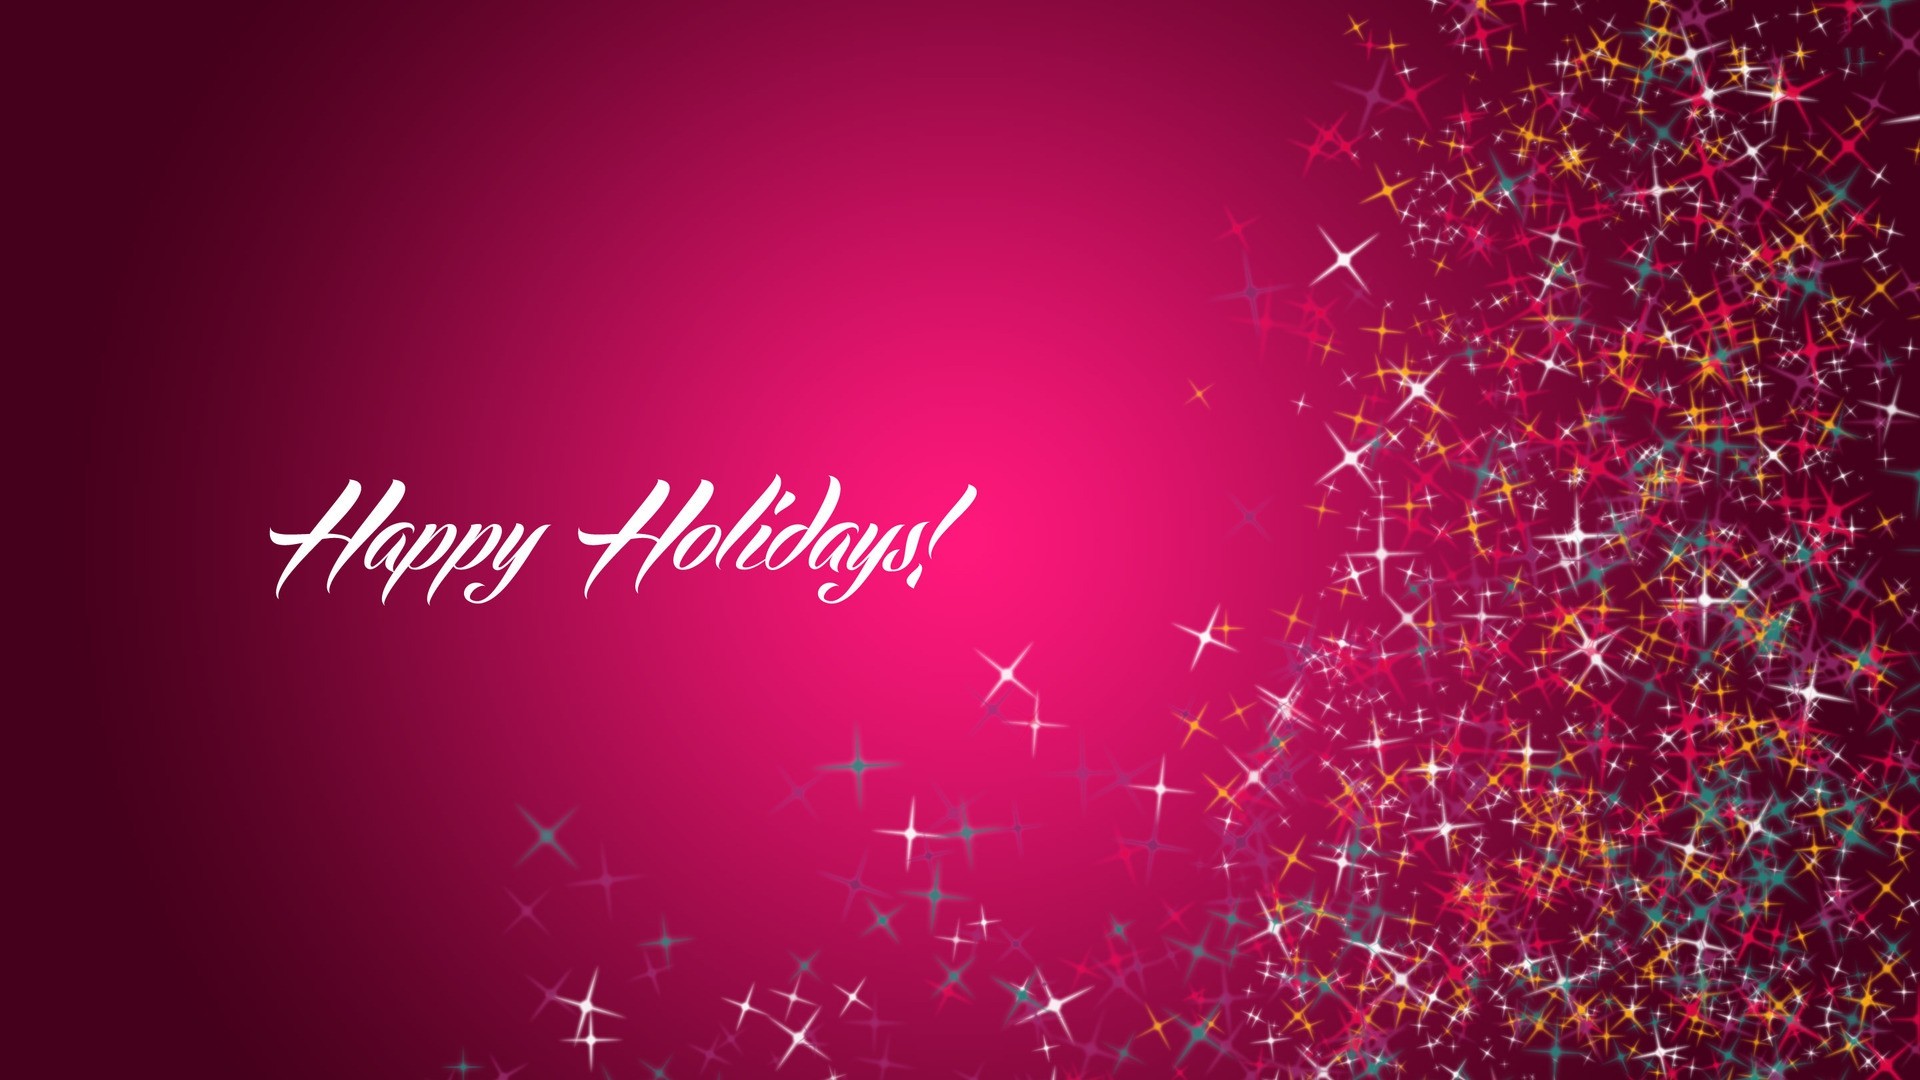 1920x1080 Holiday Wallpapers HD.